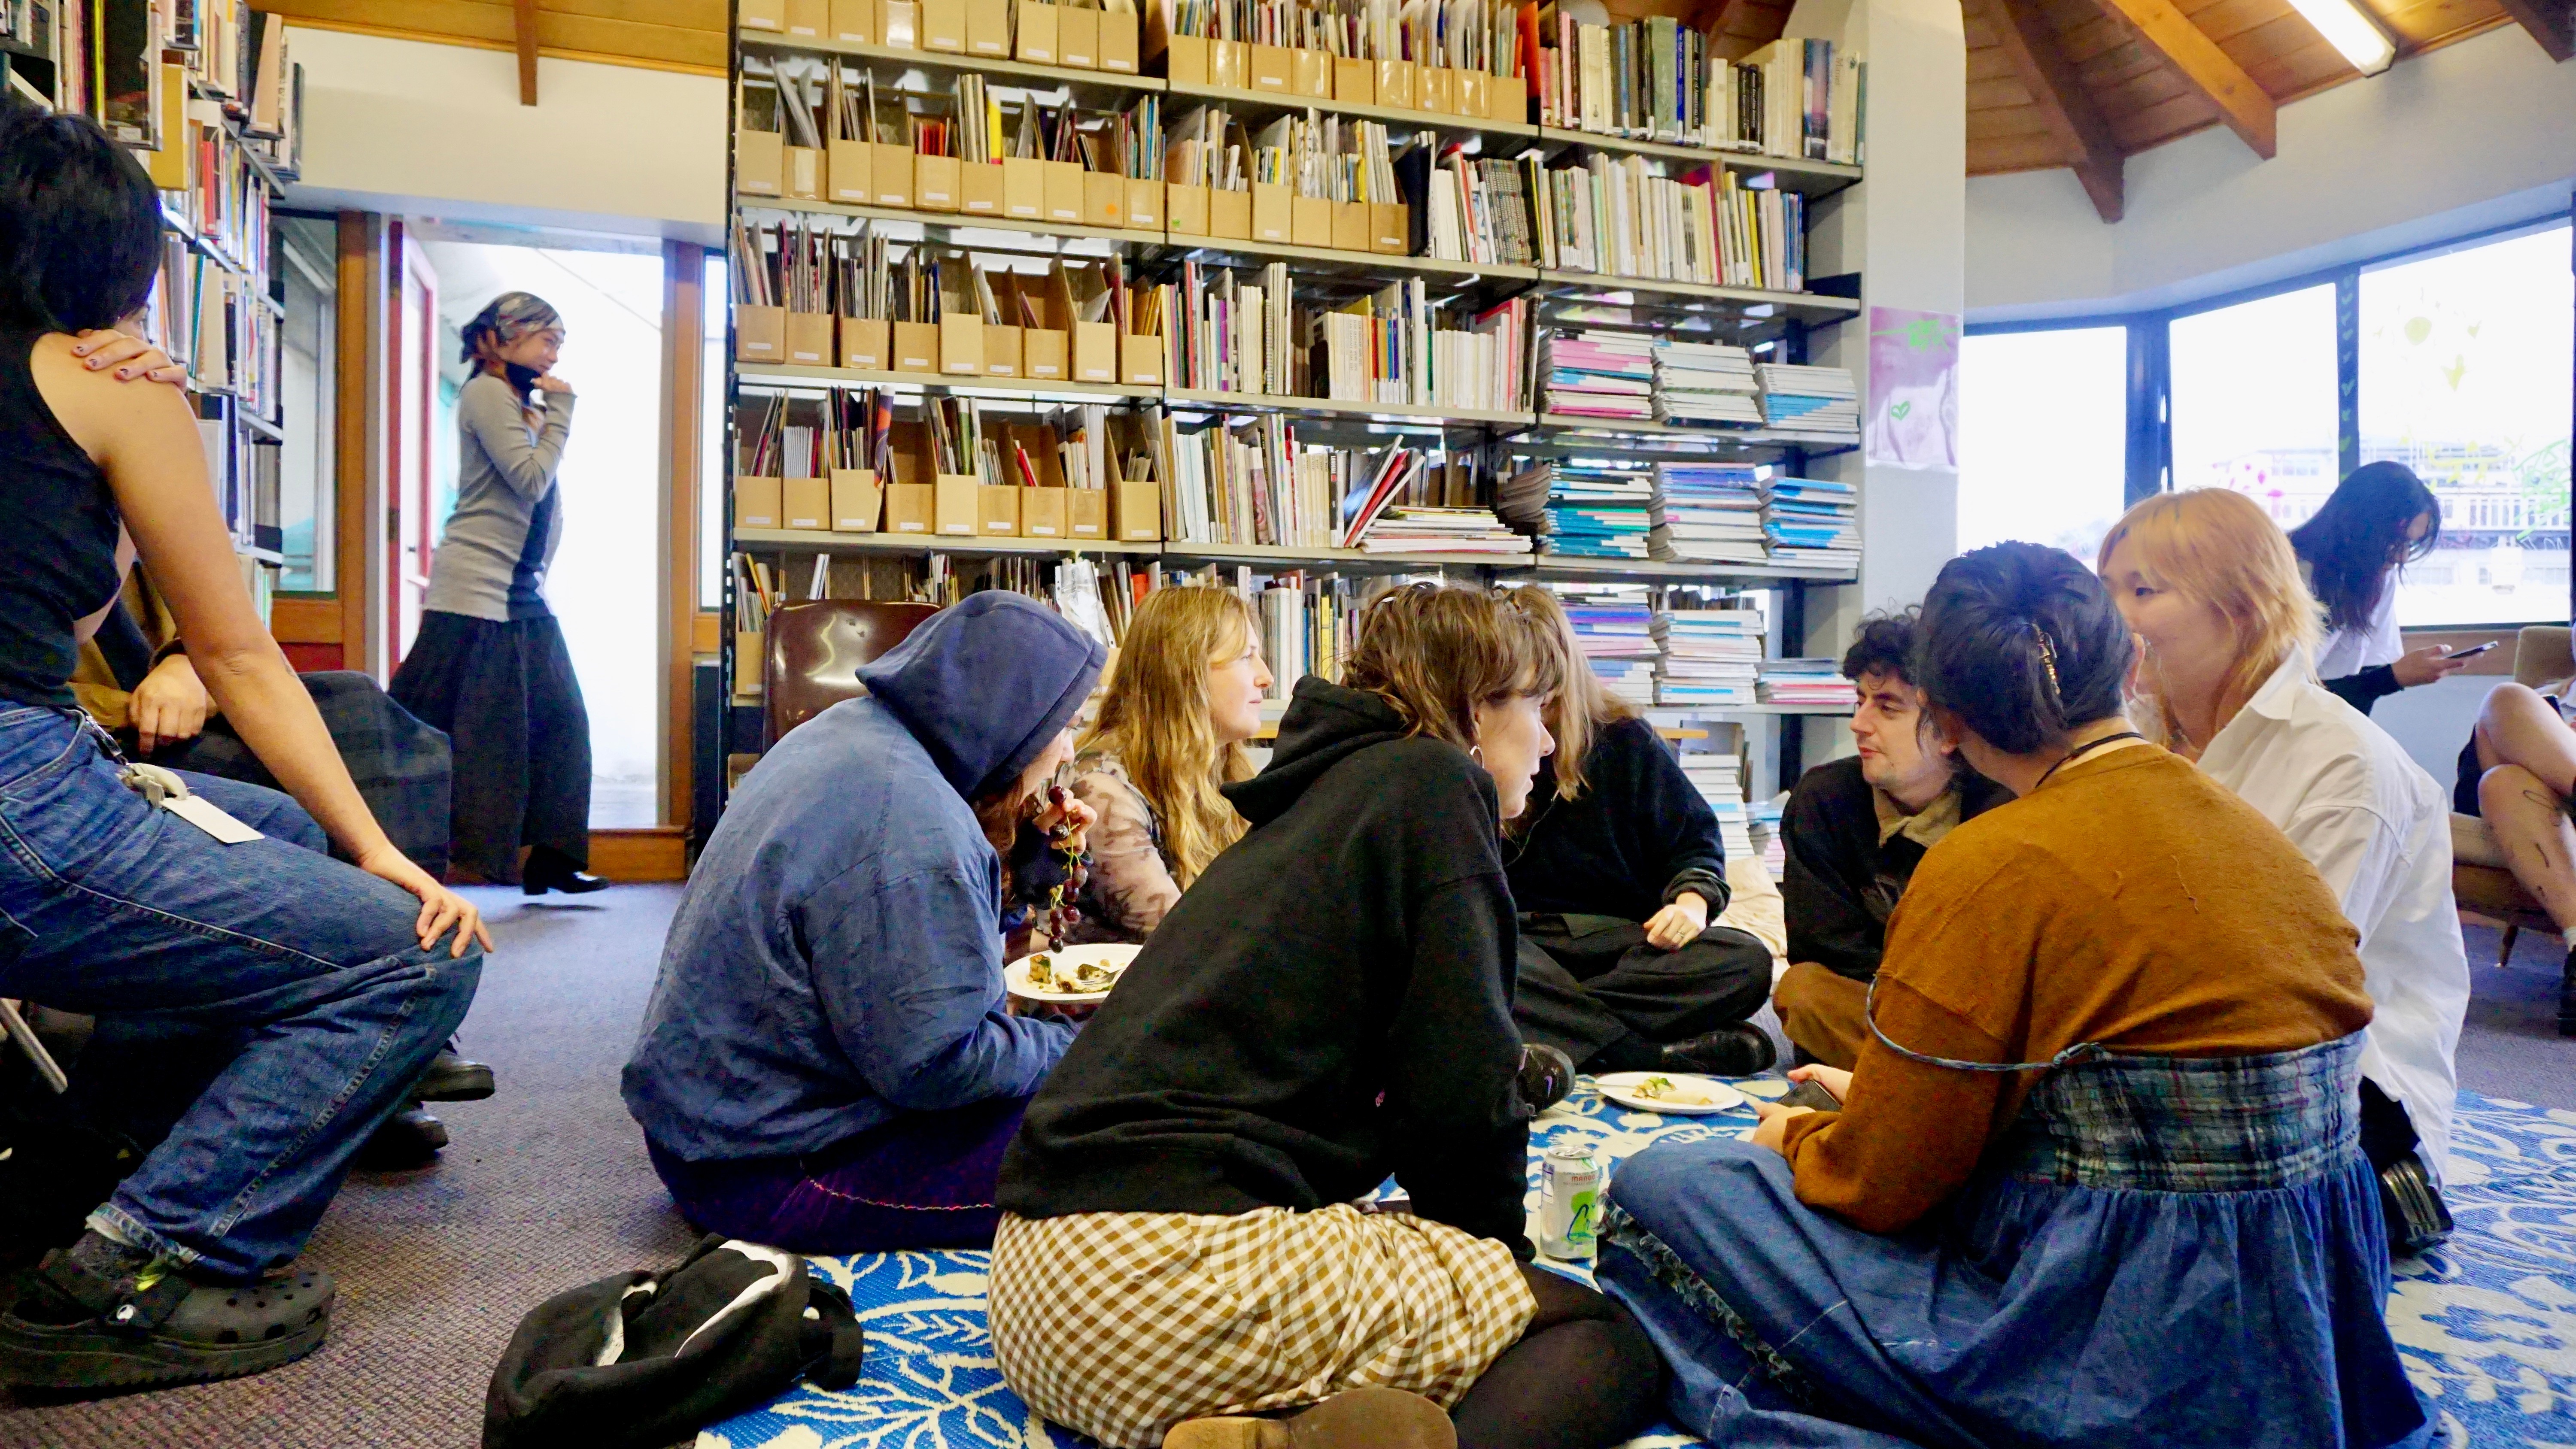 People sitting in circle on the ground, chatting in a library